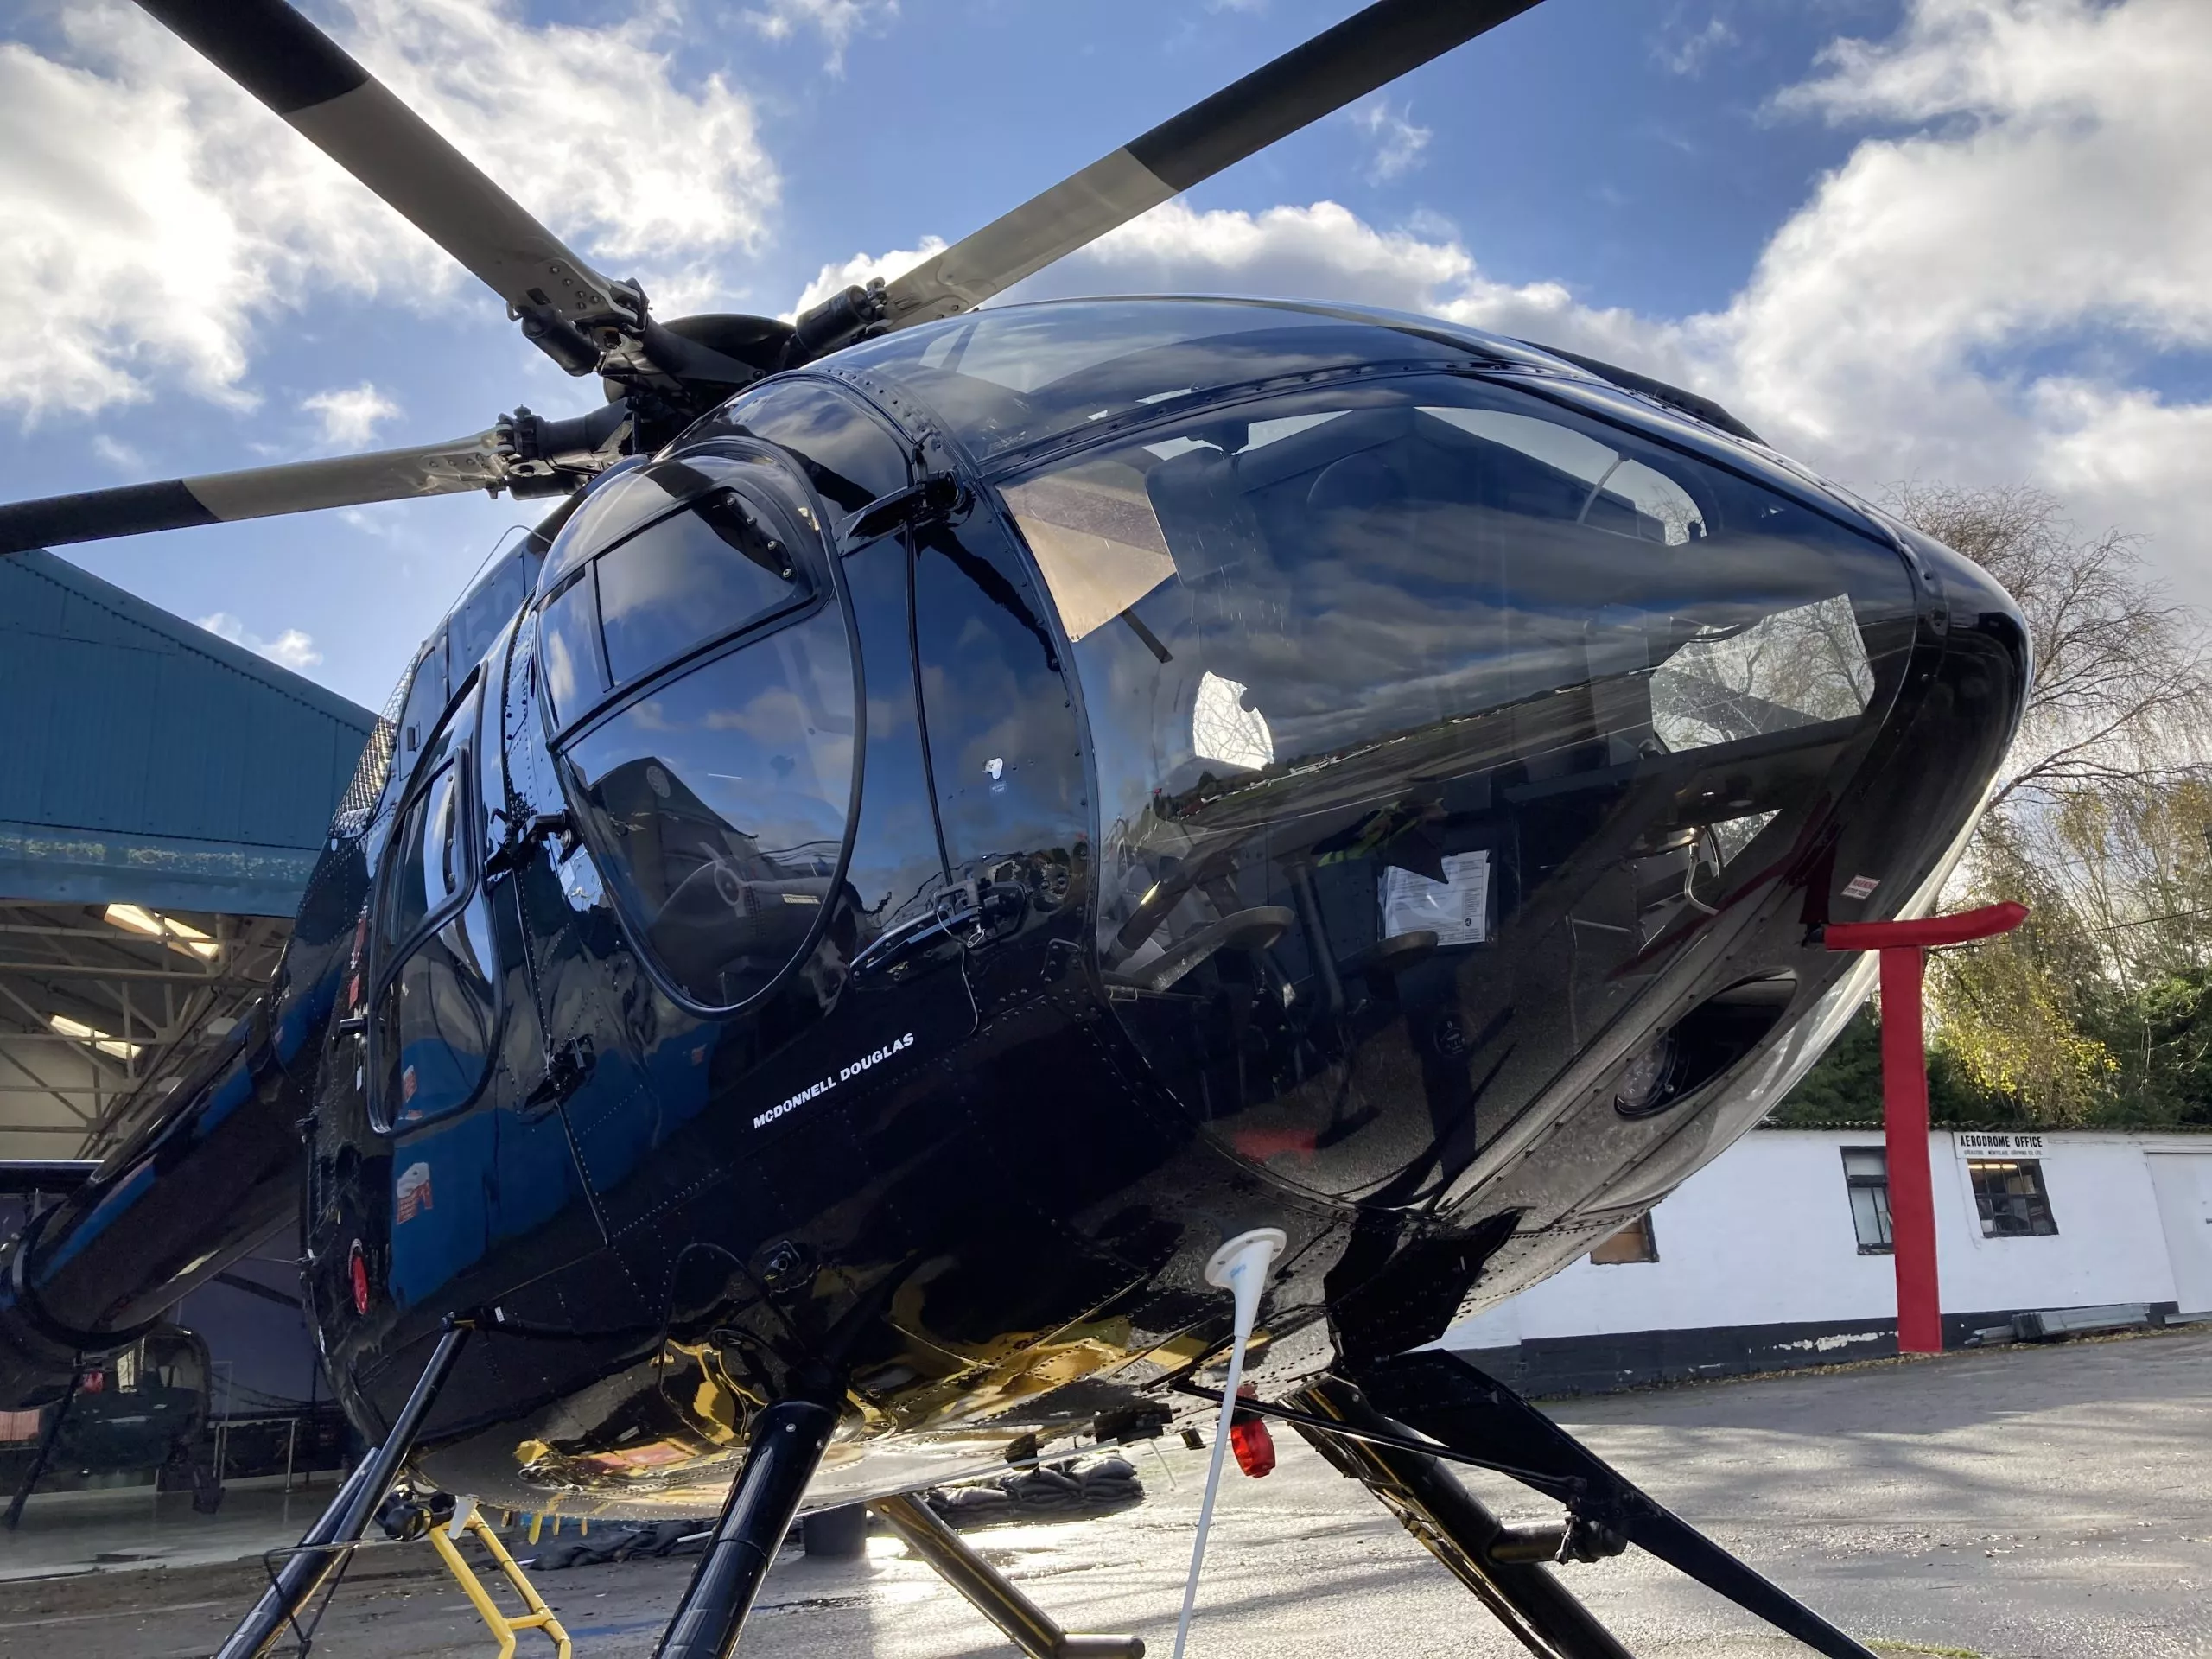 ICE Helicopters in United Kingdom, Europe | Helicopter Sport - Rated 1